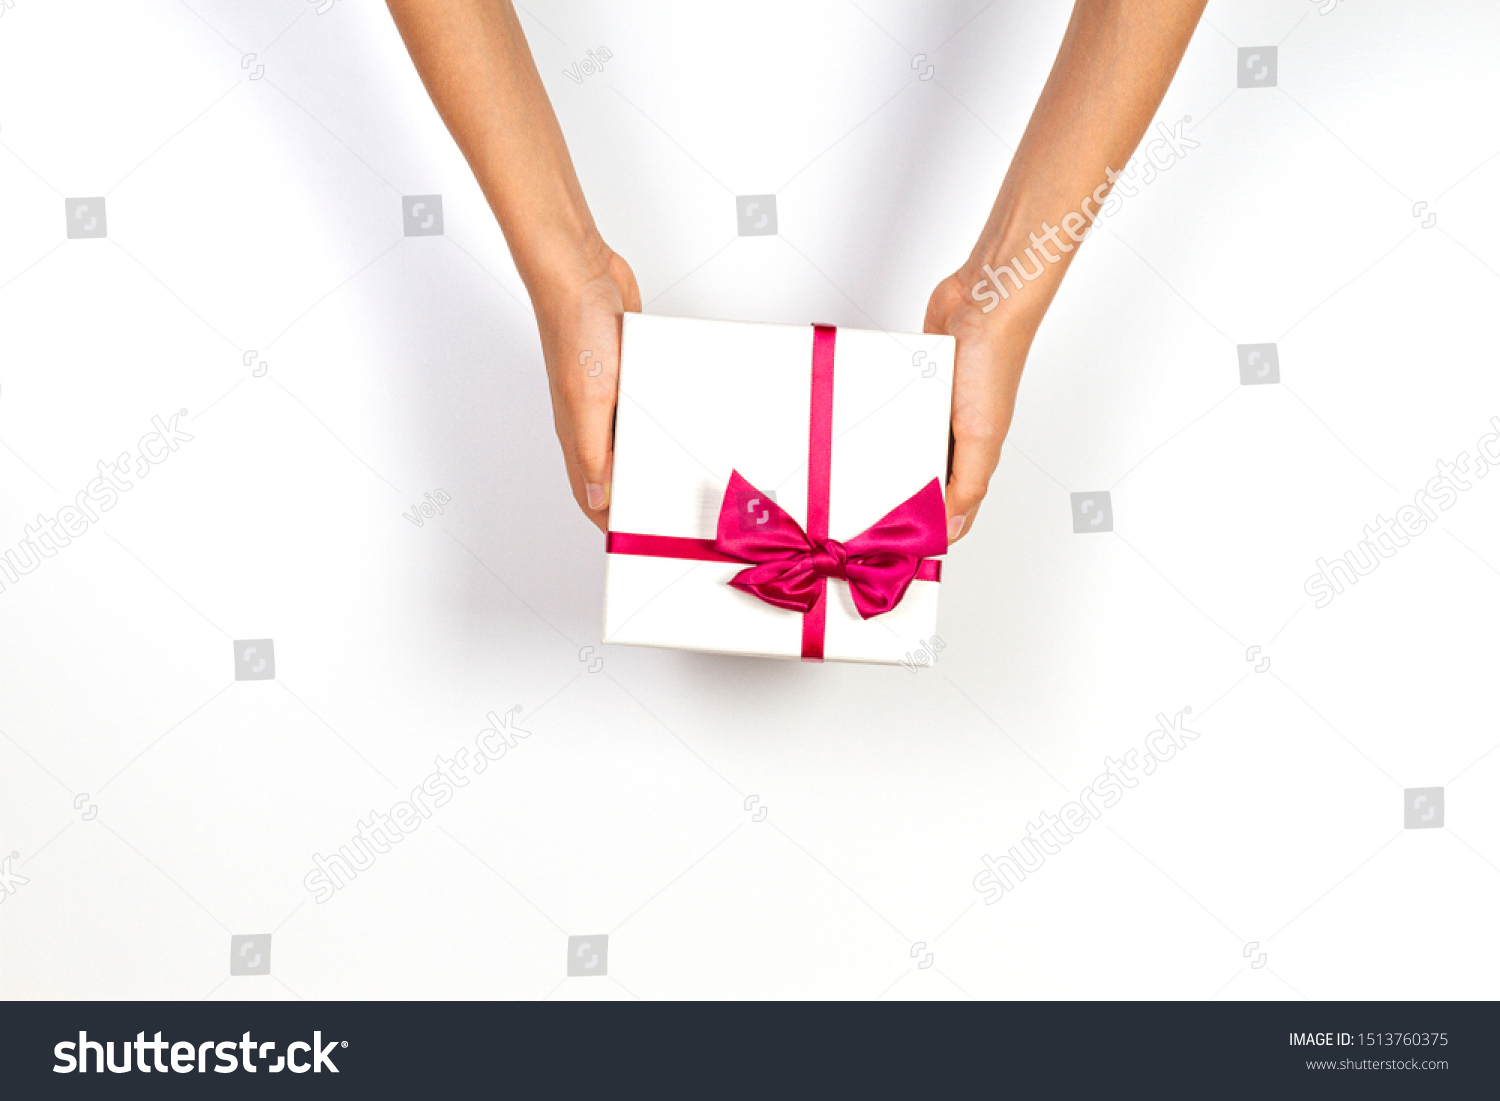 Child hands holding present gift box tied with ribbon on white background. Top view, place for text. Holiday concept #1513760375